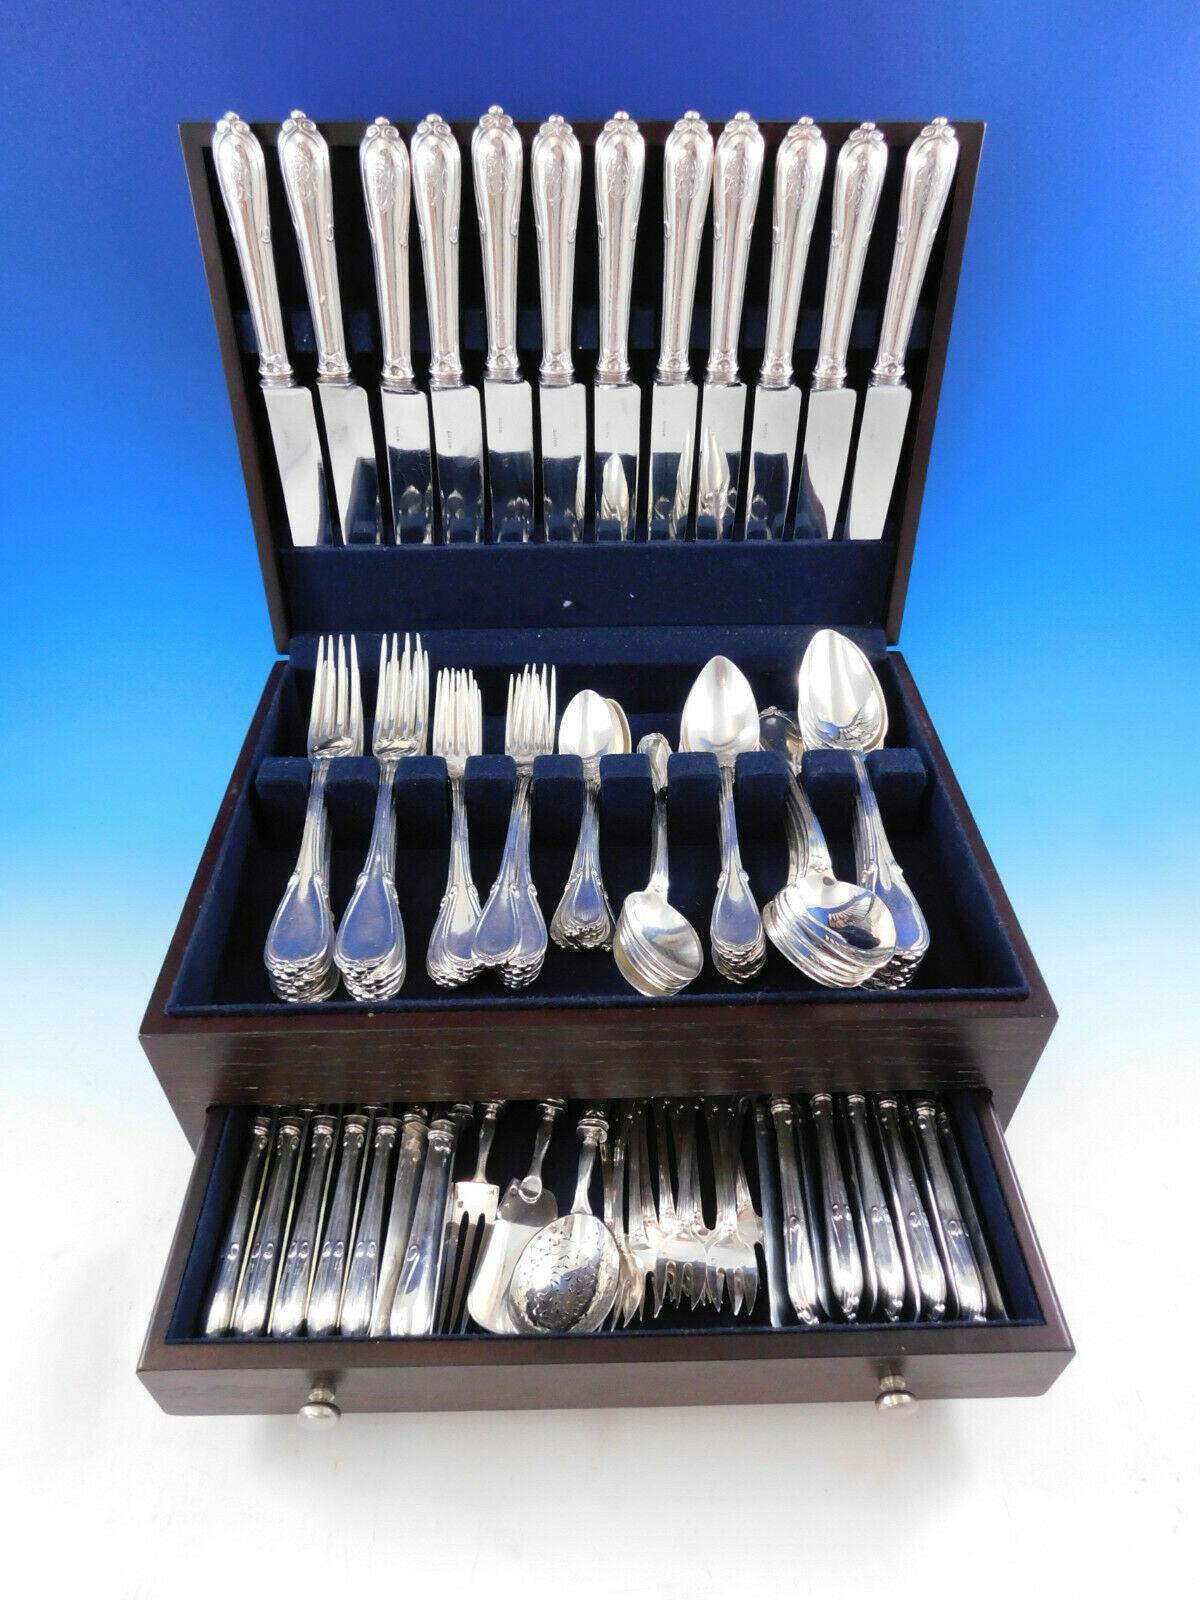 Outstanding dinner size fontenelle by Odiot France 950 sterling silver flatware set, 105 pieces. The forks in this set are particularly impressive and massively heavy. This fabulous cutlery service includes:

12 dinner size knives, 10 1/2